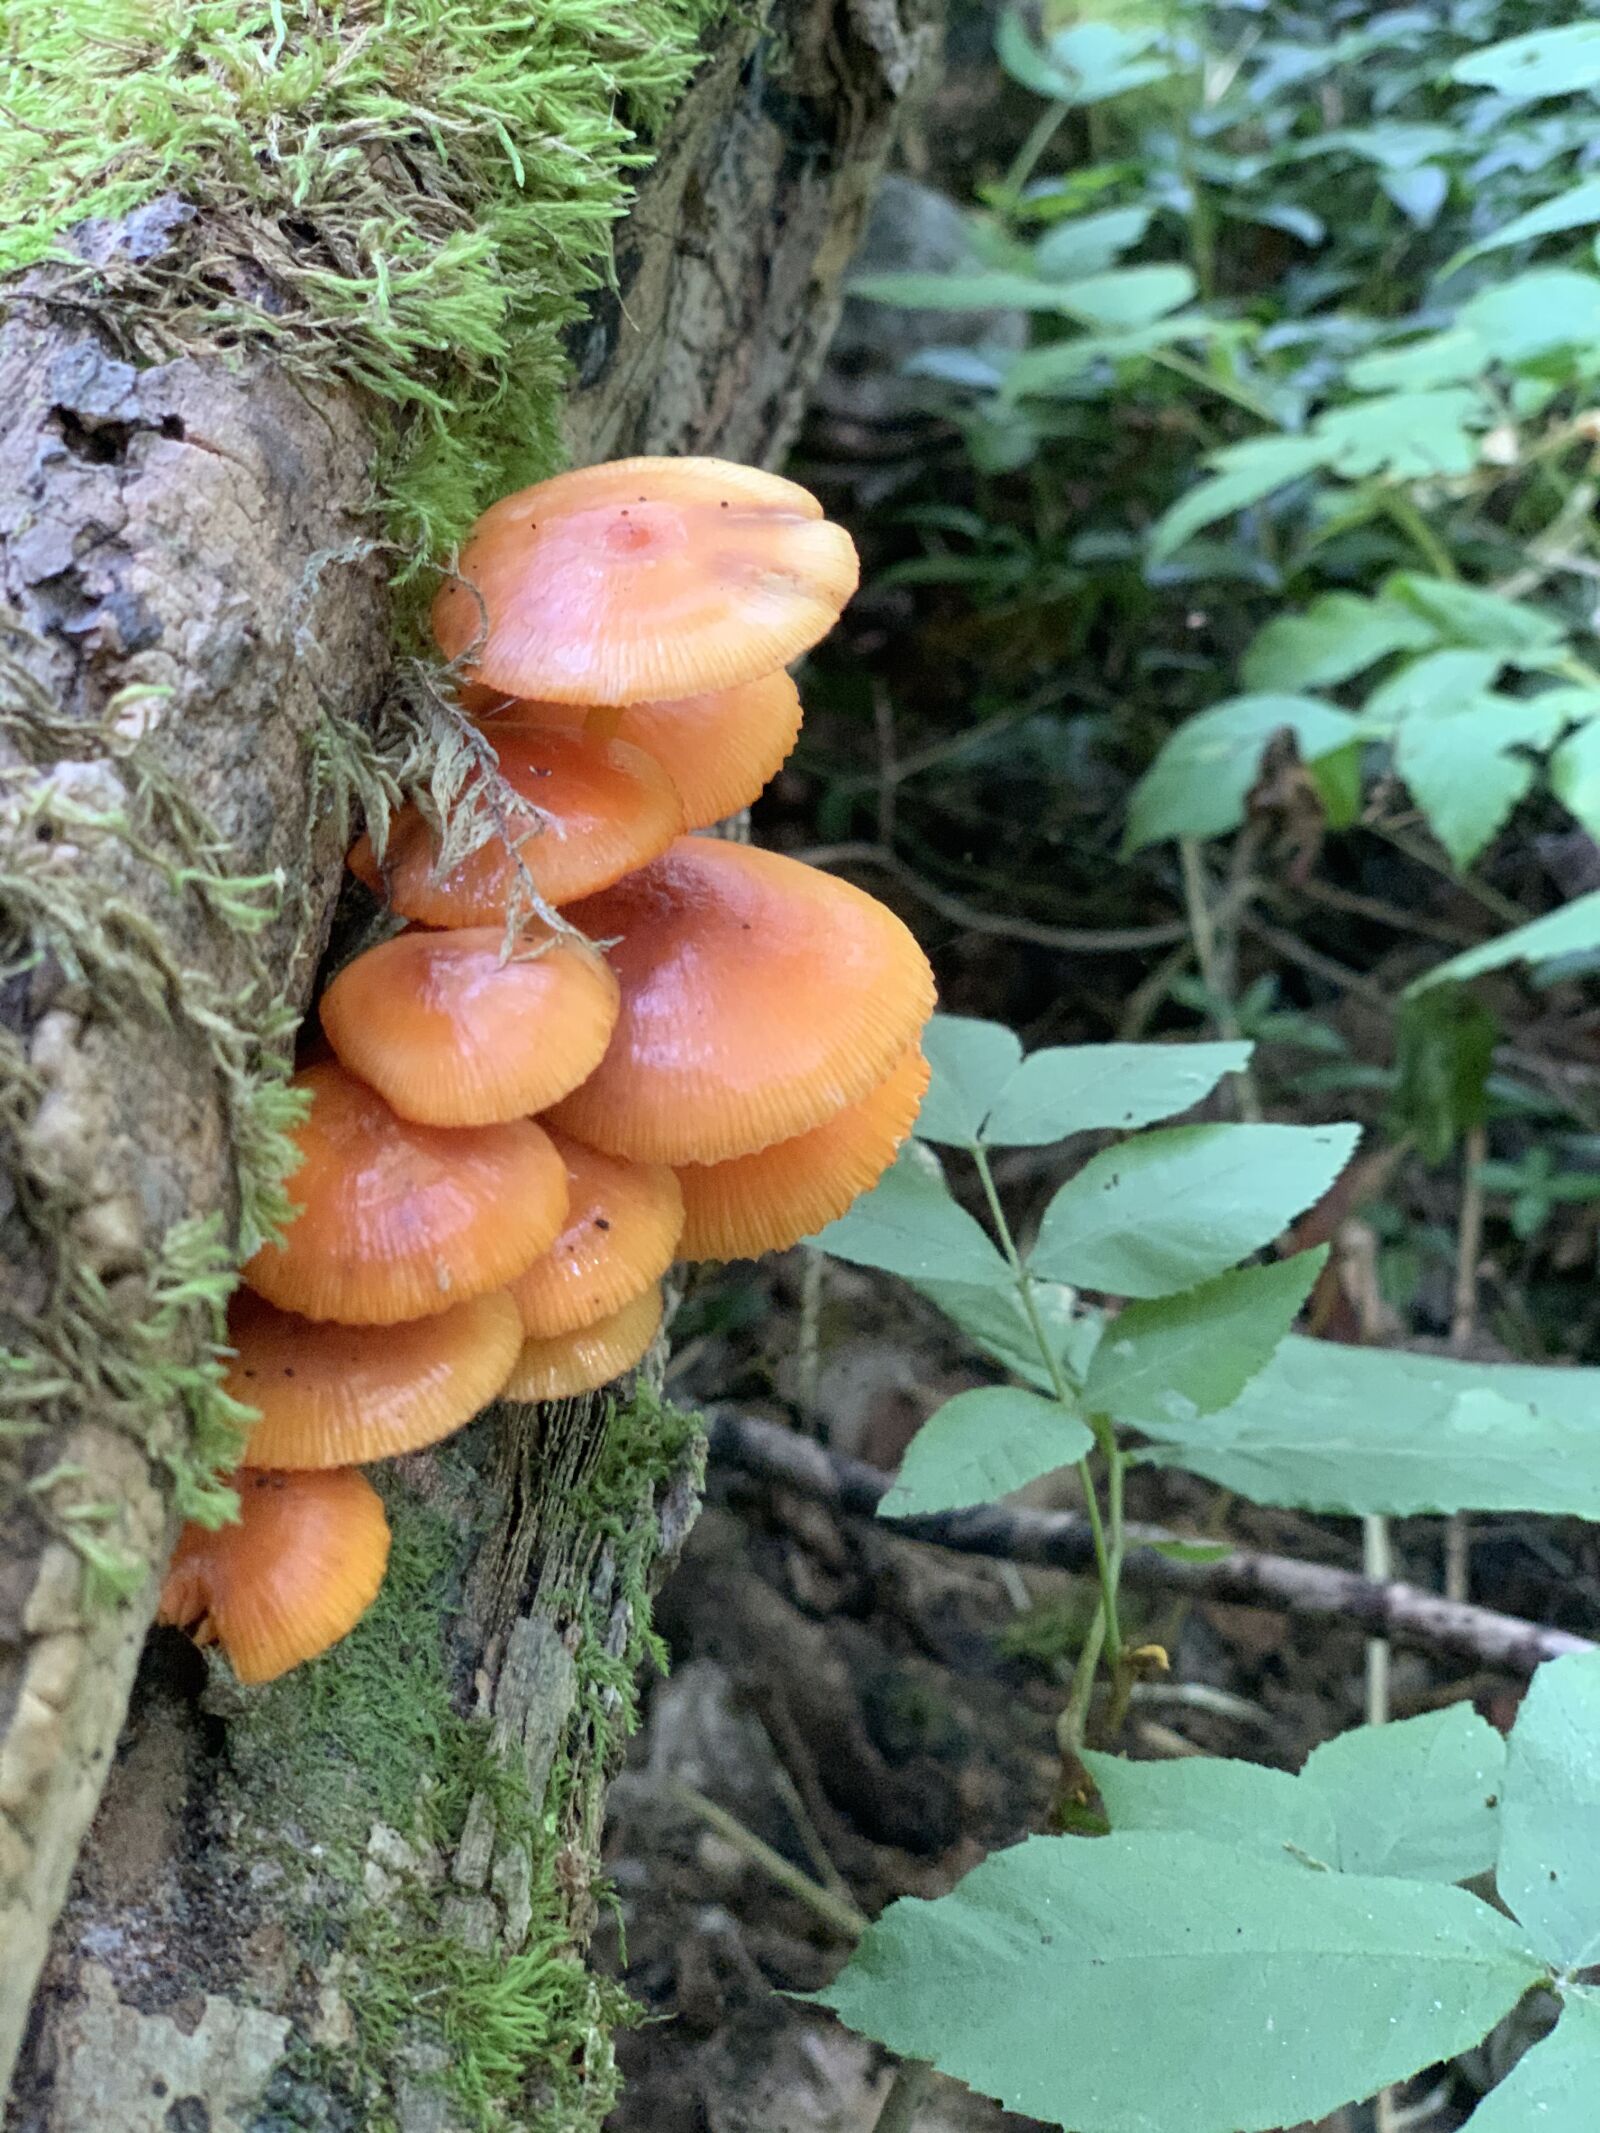 iPhone XS back dual camera 6mm f/2.4 sample photo. Mushrooms, forest, nature photography